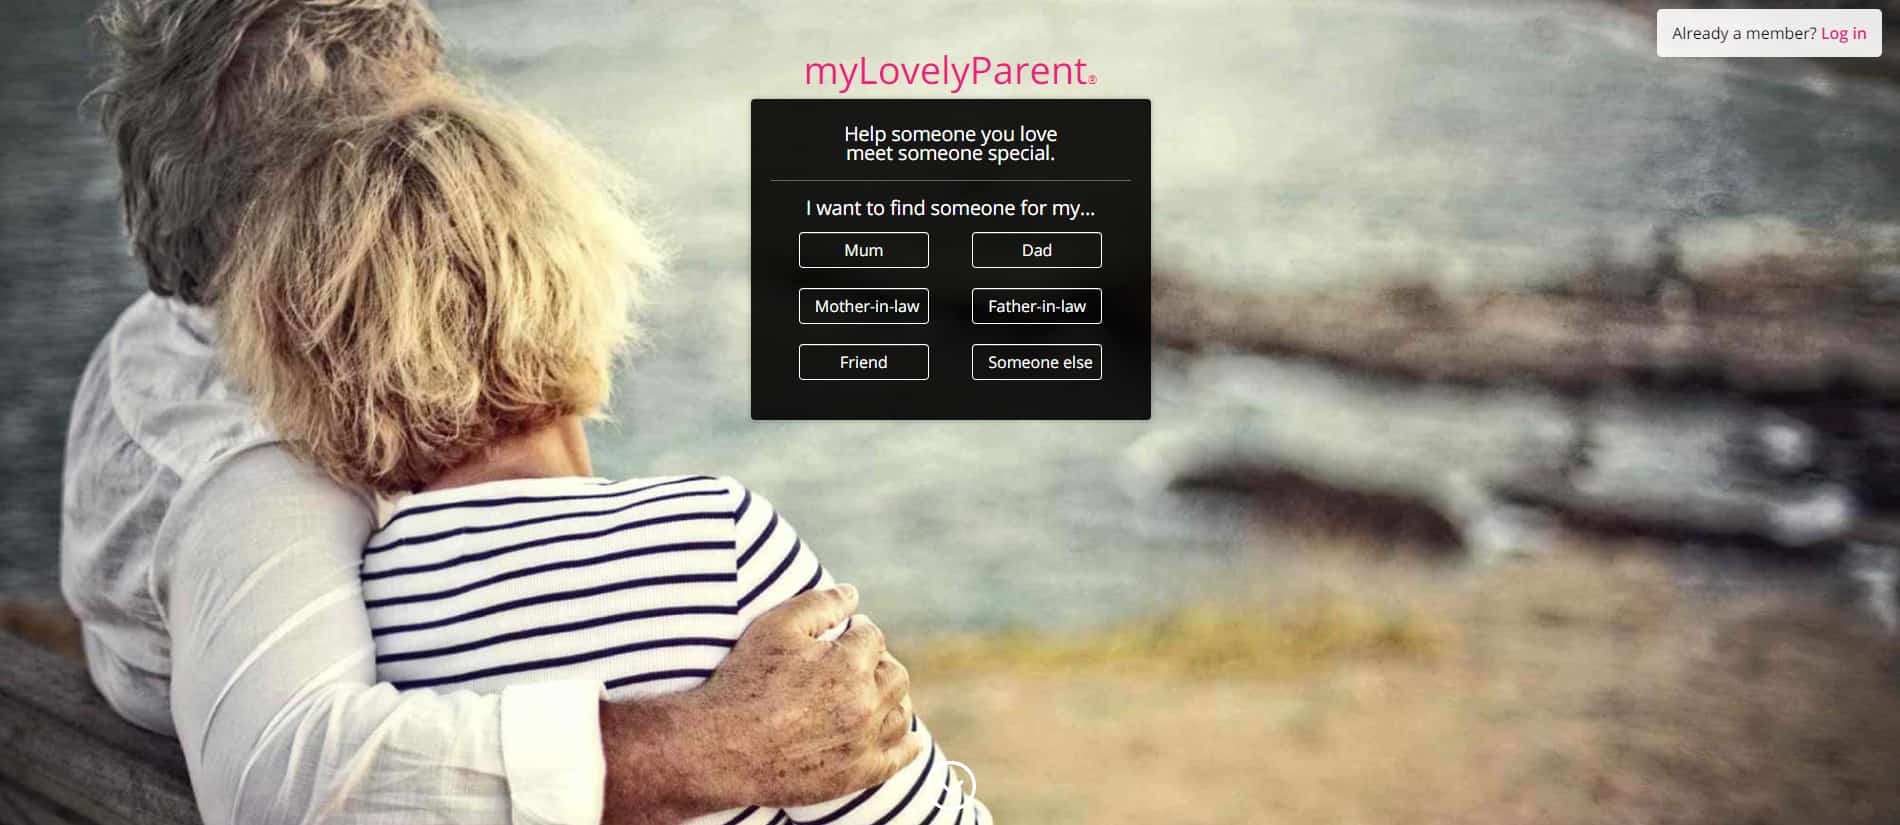 My Lovely Parent homepage for international dating site review 